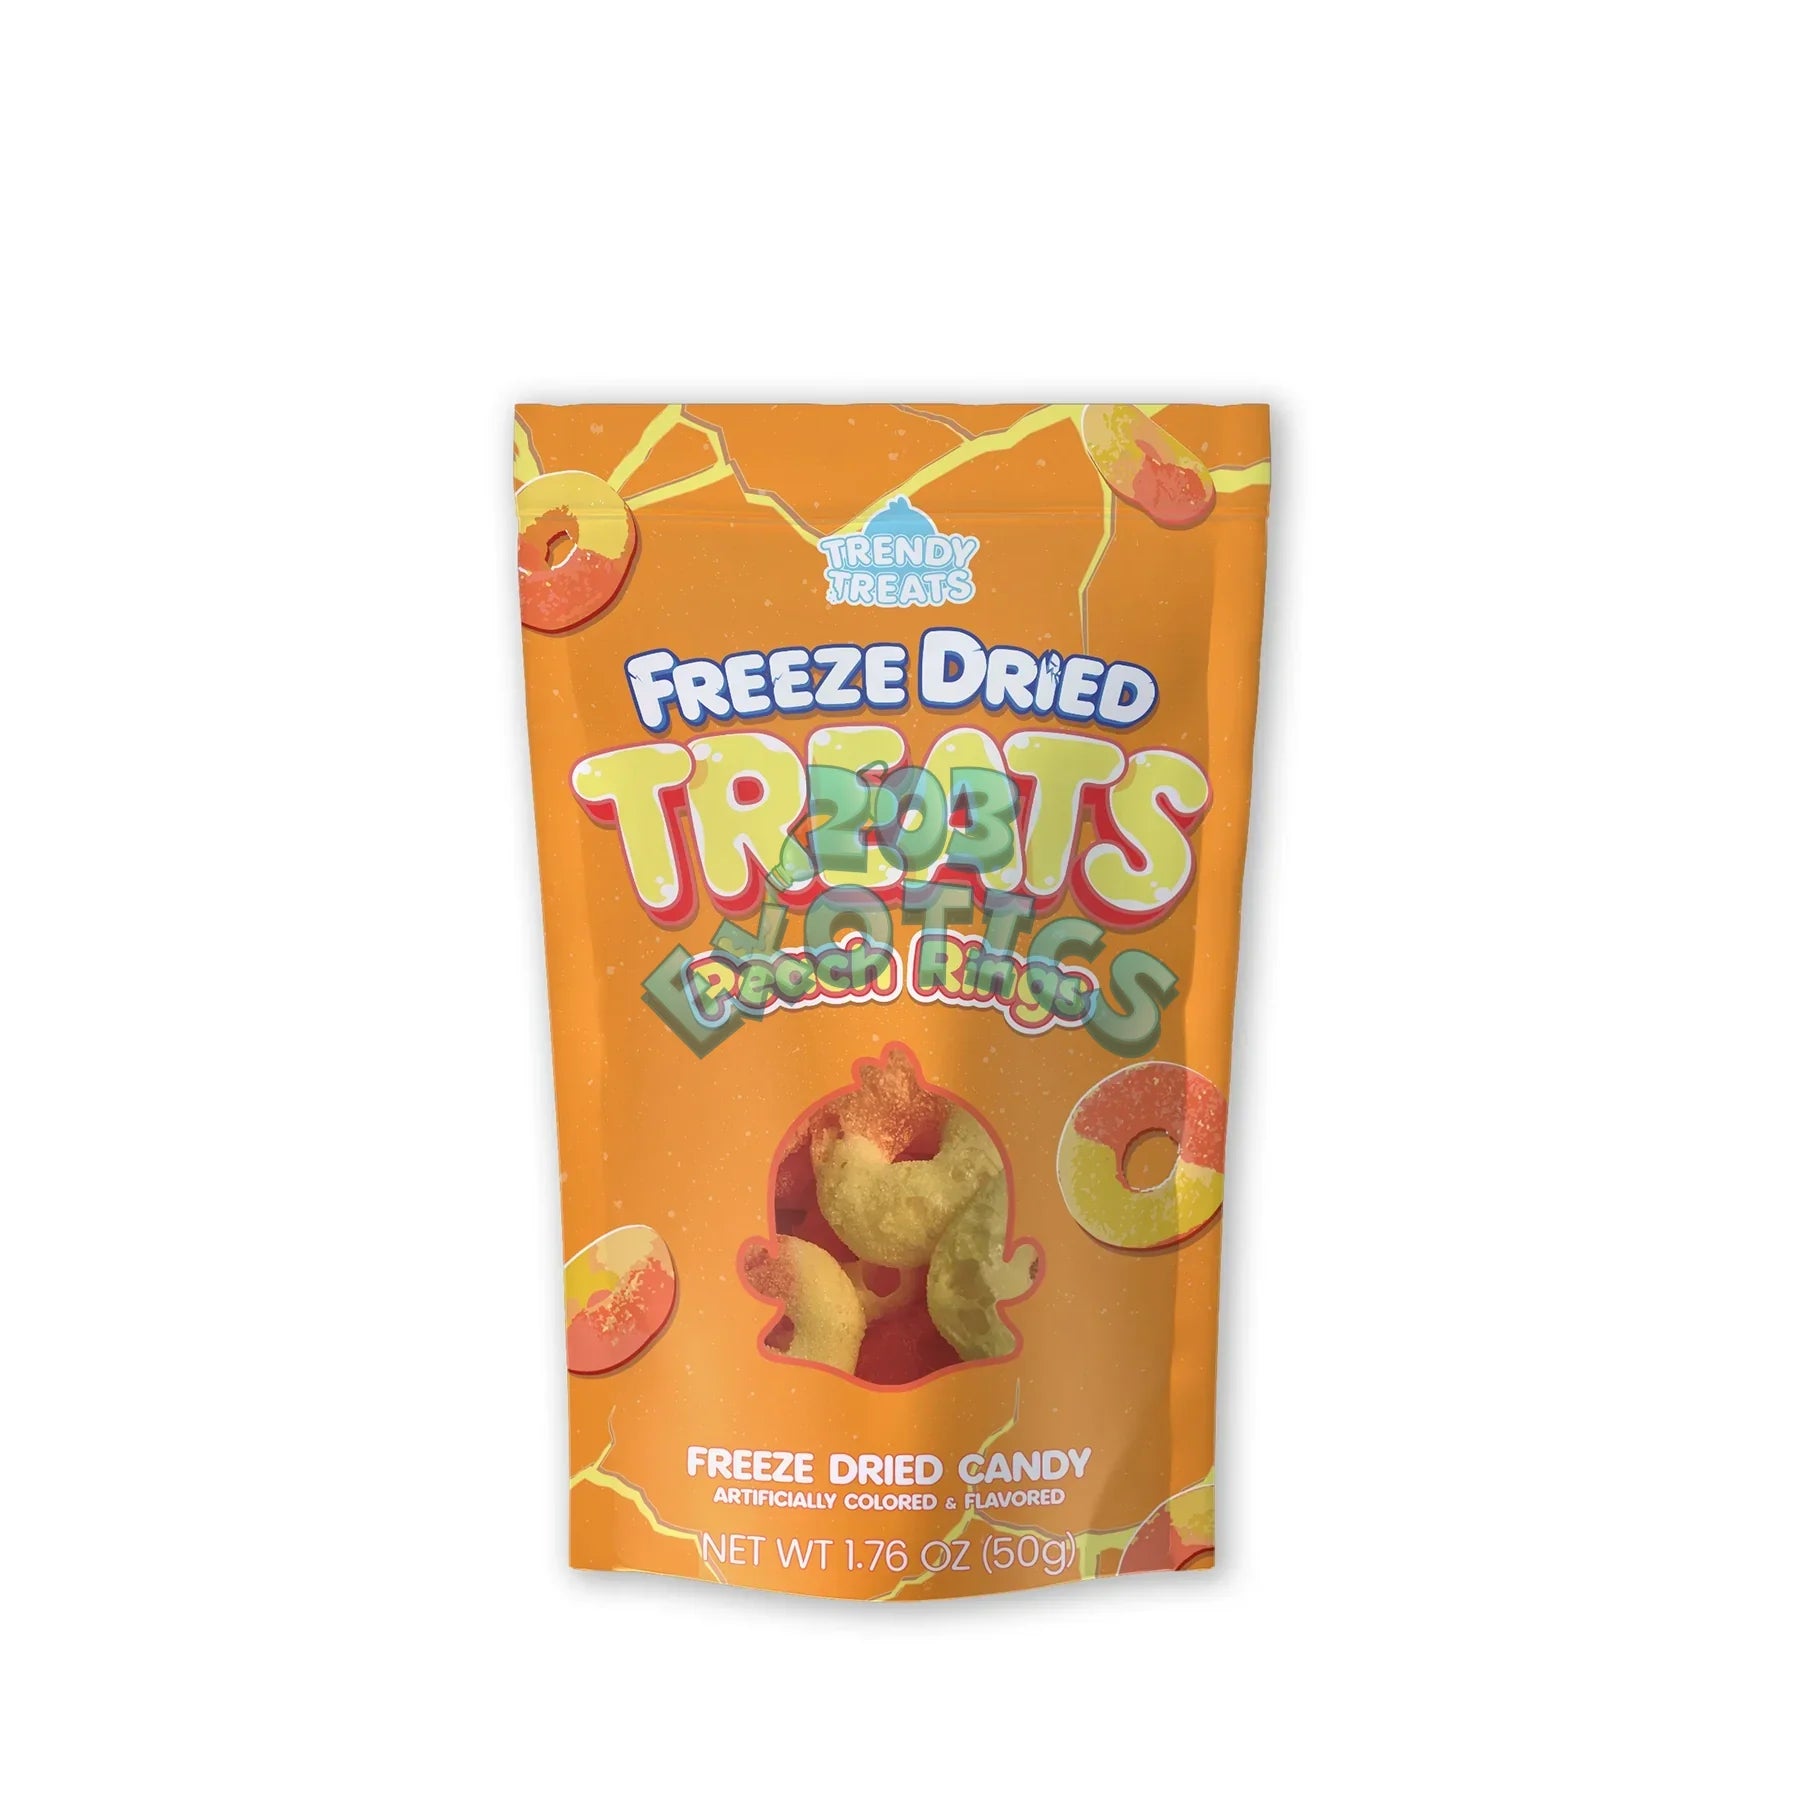 Trendy Treats Freeze Dried Candy Peach Rings